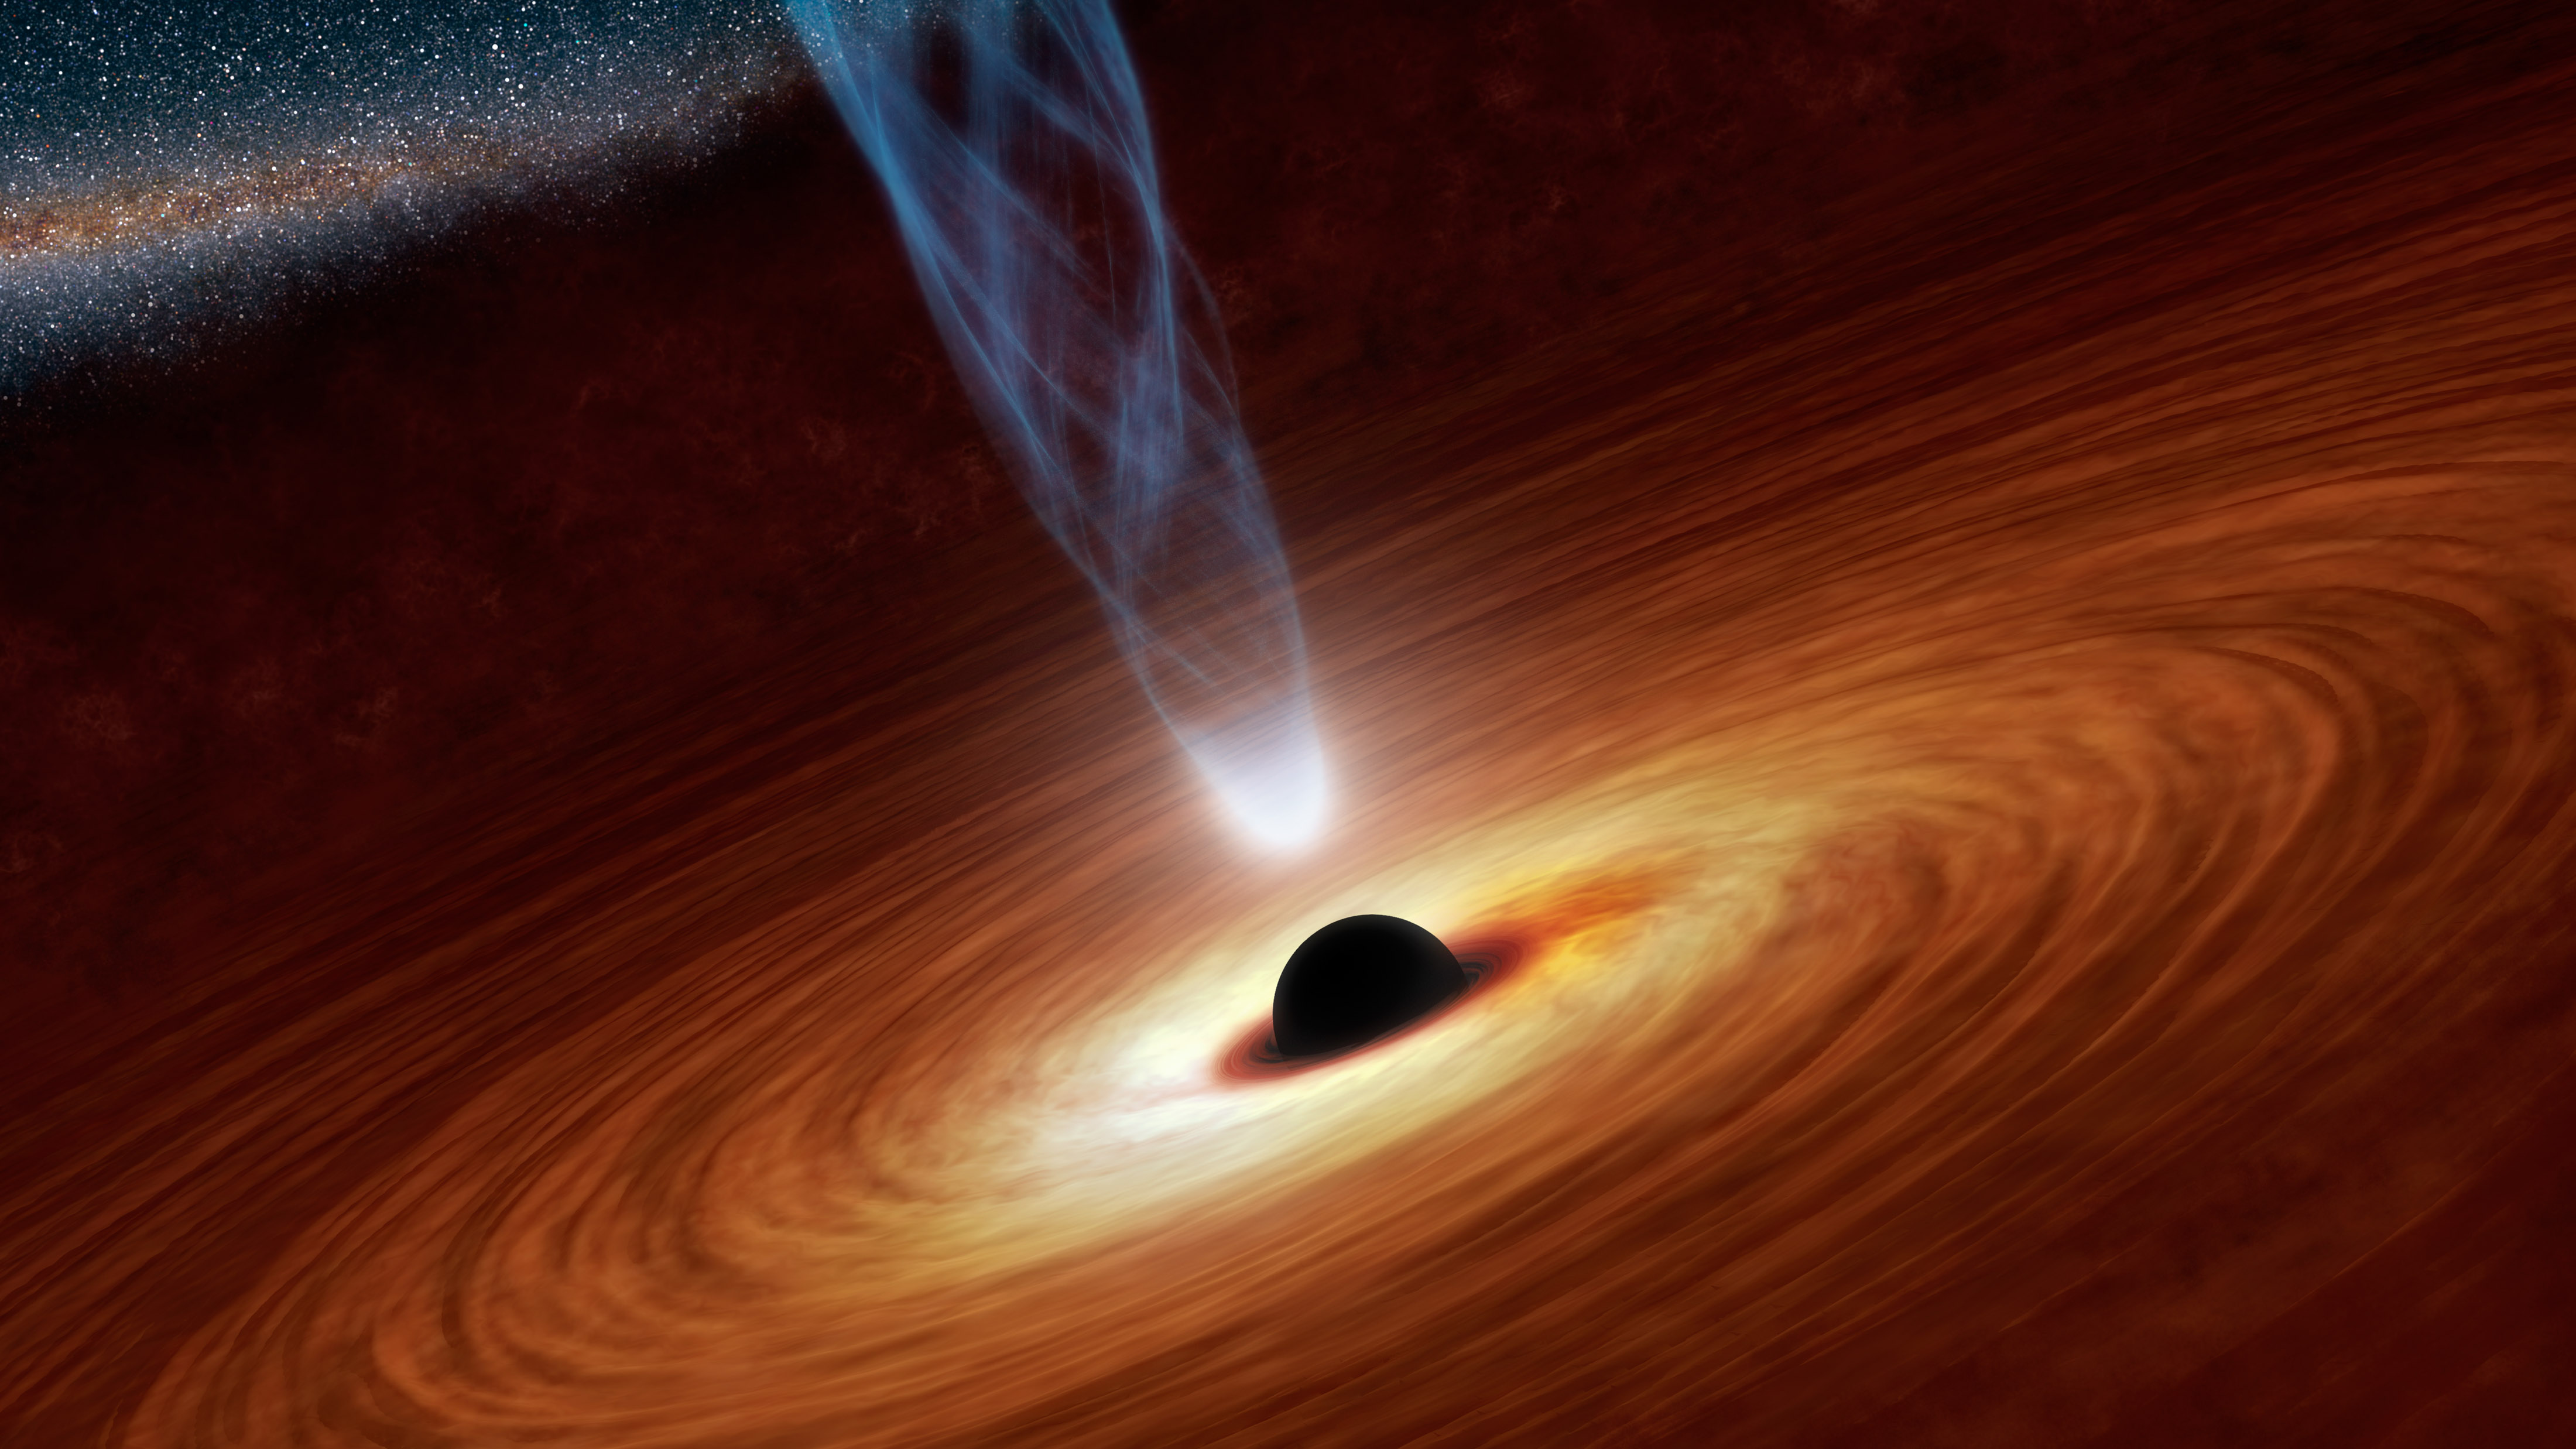 Image: Understanding massive black hole formation: Researchers believe supersonic gas streams from the Big Bang may provide the answer